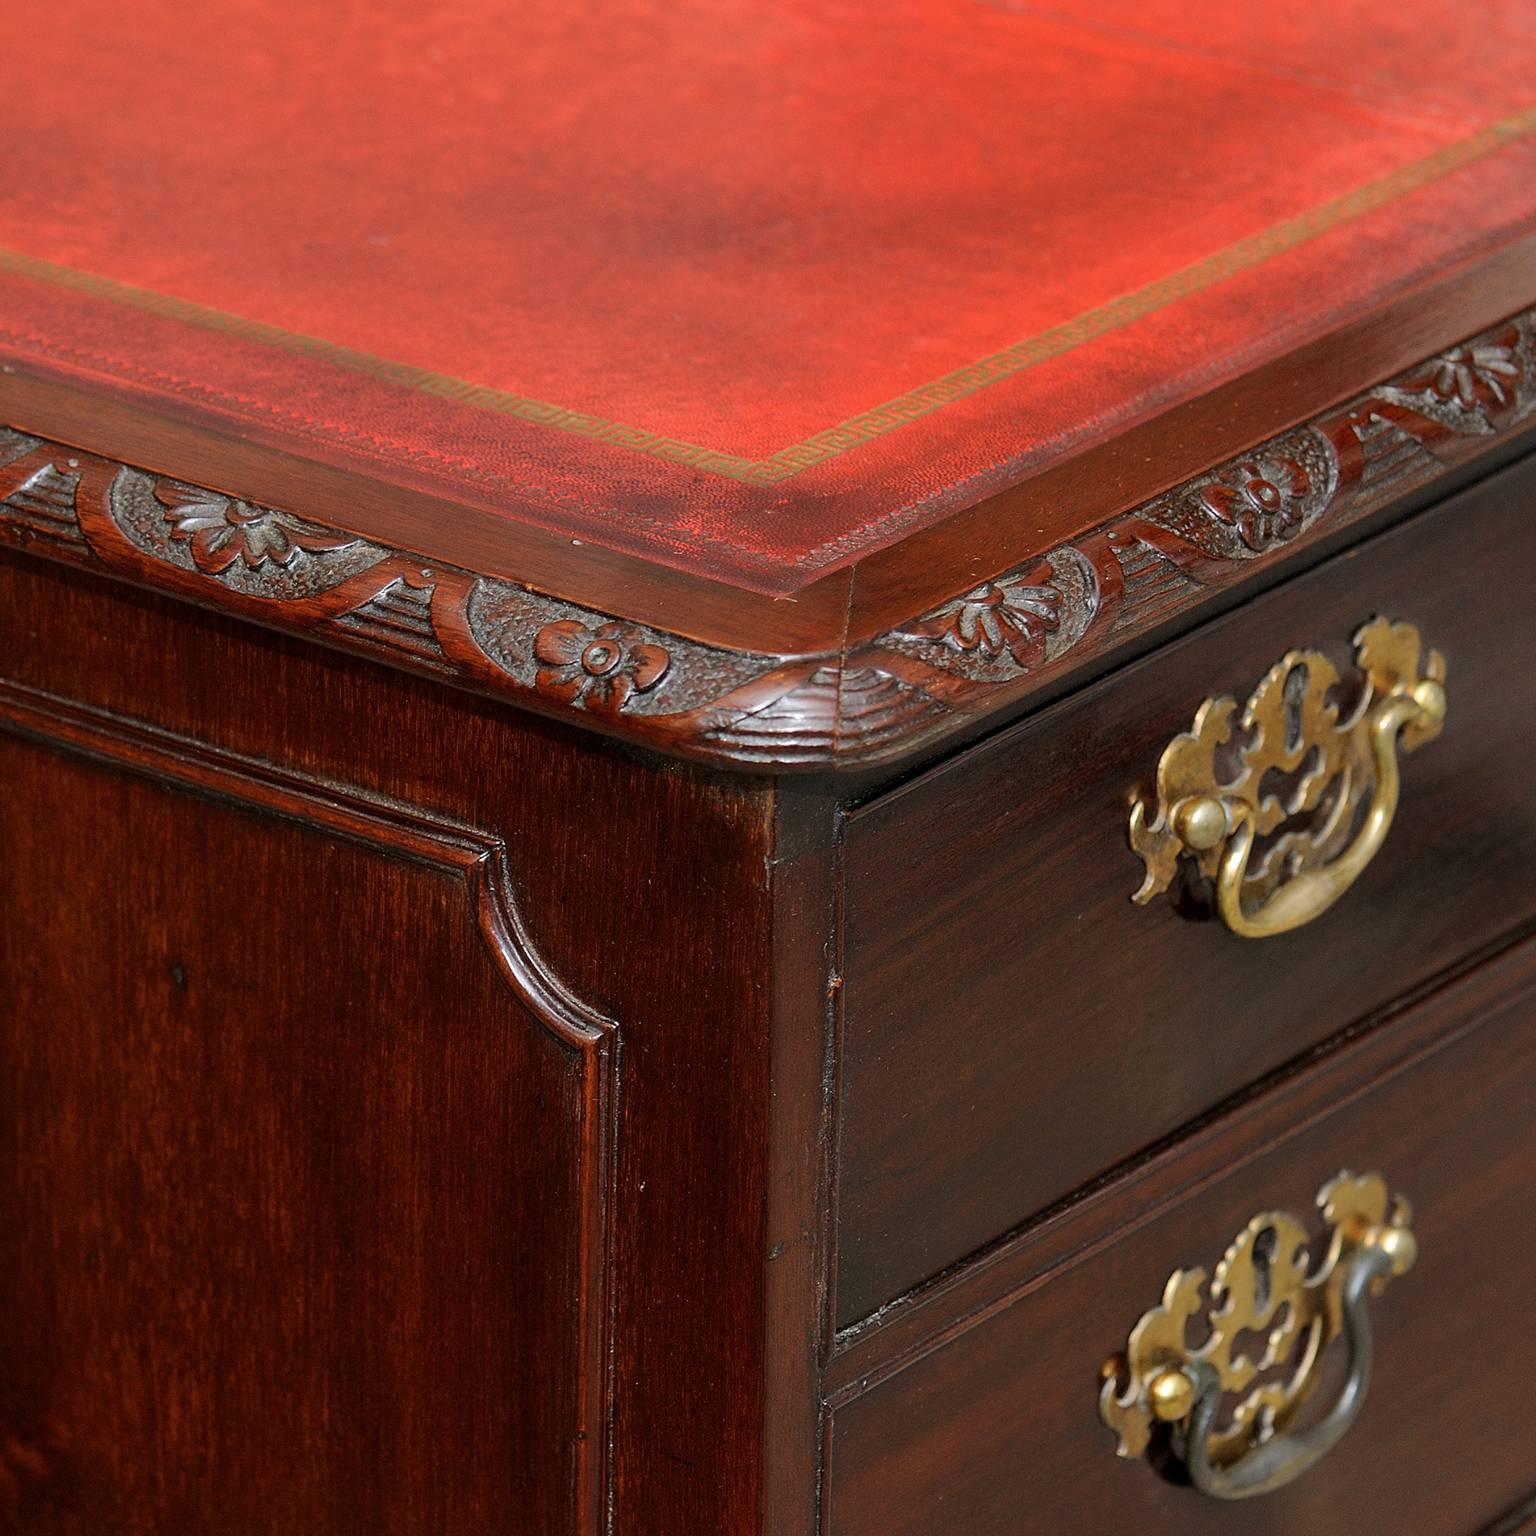 Polished Mid-19th Century Chippendale Style Mahogany Desk, circa 1860 For Sale